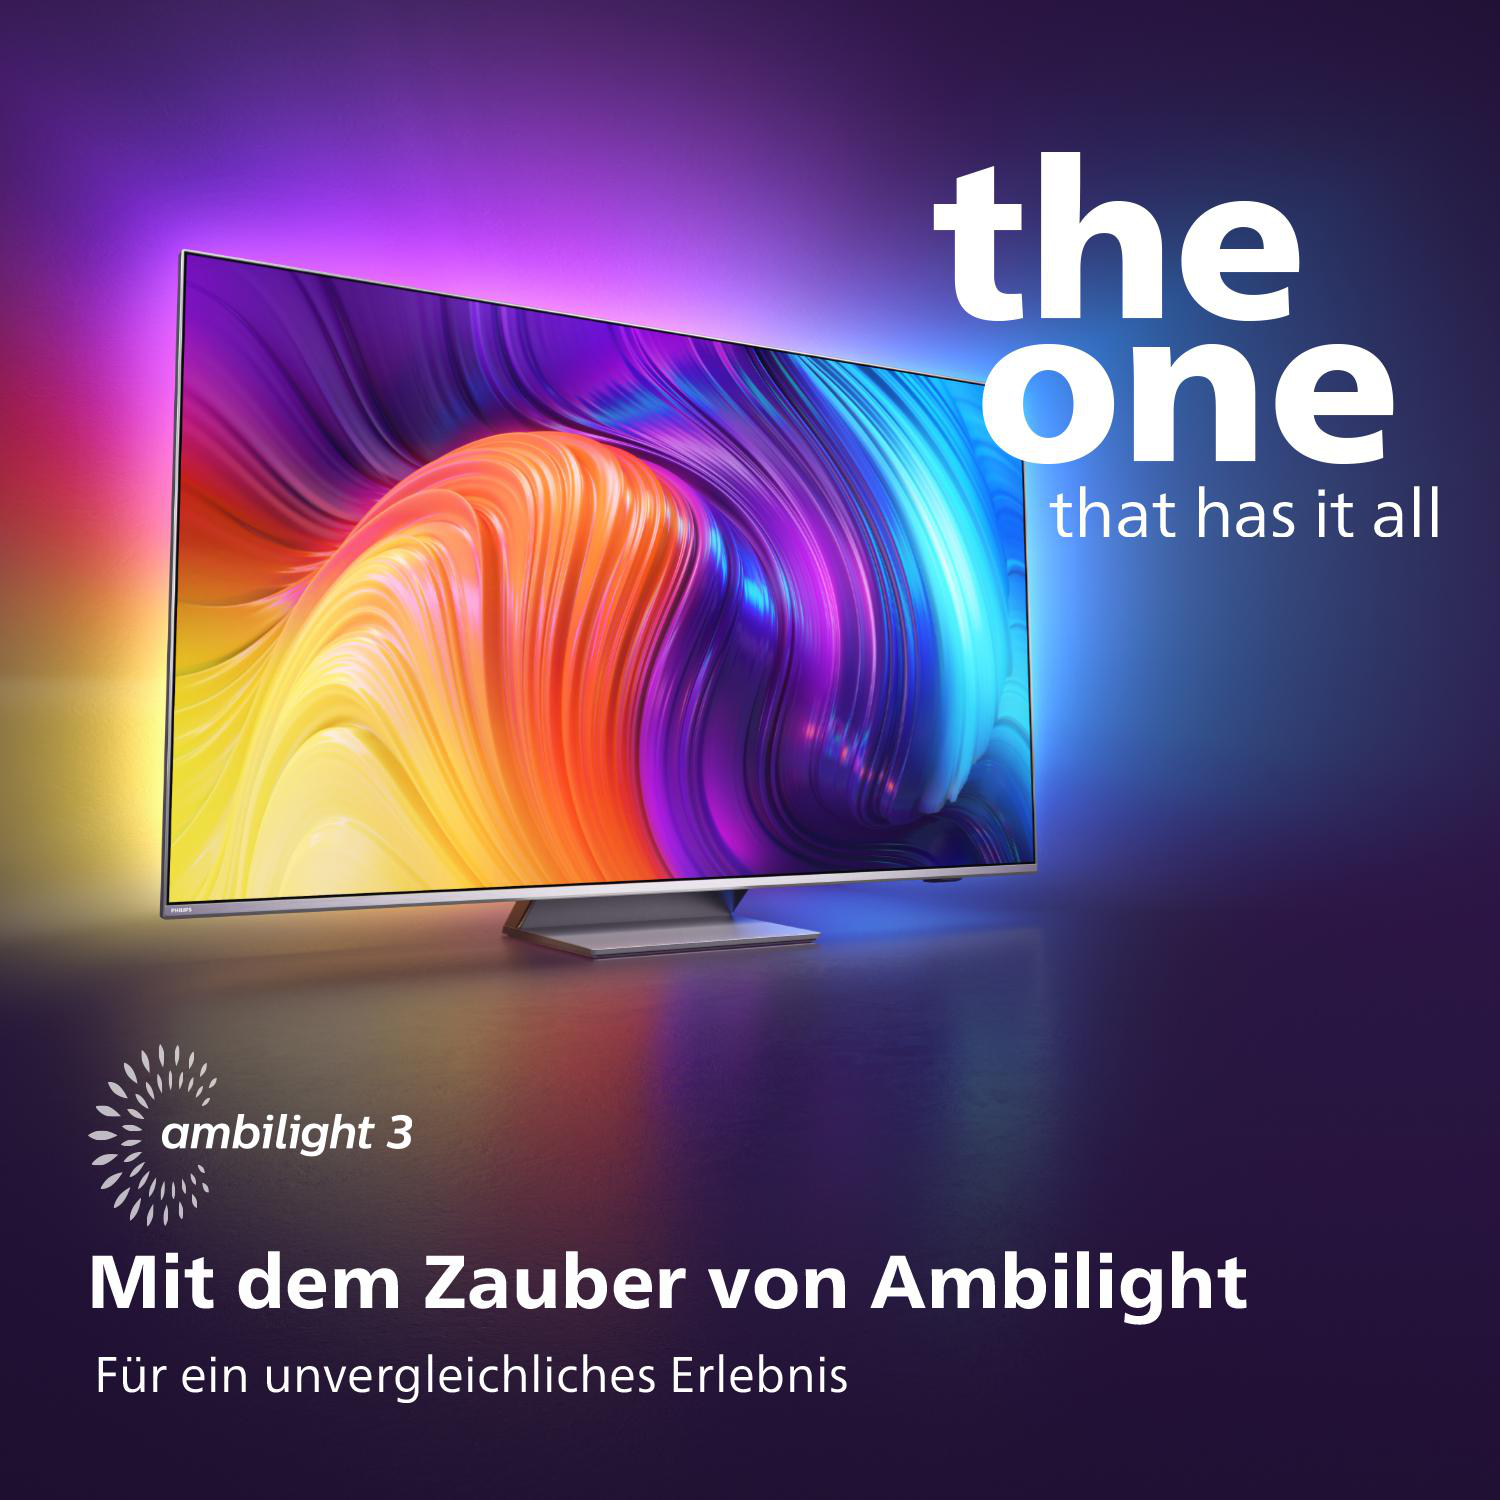 One TV LED cm, PHILIPS Zoll) TV™ UHD (50 UHD TV, 50PUS8837/12 (Flat, (R)) Ambilight, SMART 11 4K, / Android 126 50 The Zoll 4K